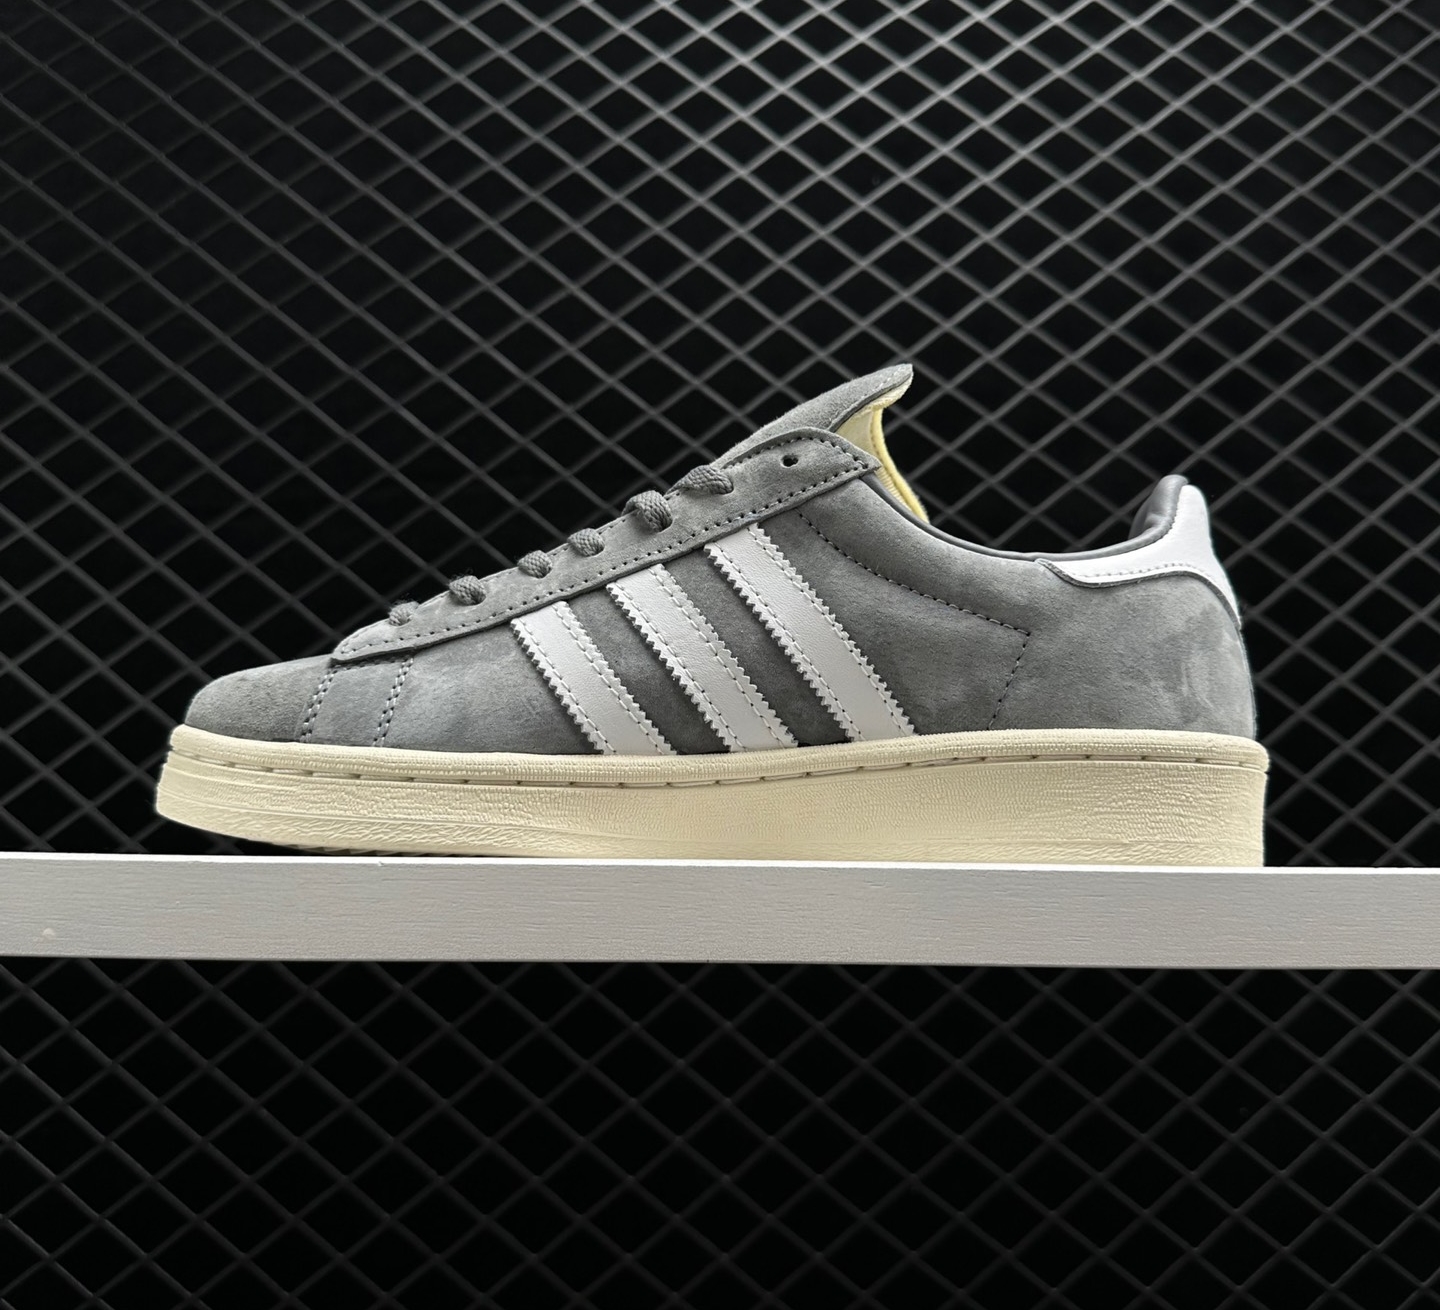 Adidas Campus 80s 'Grey' GX9406: Classic Style and Superior Comfort